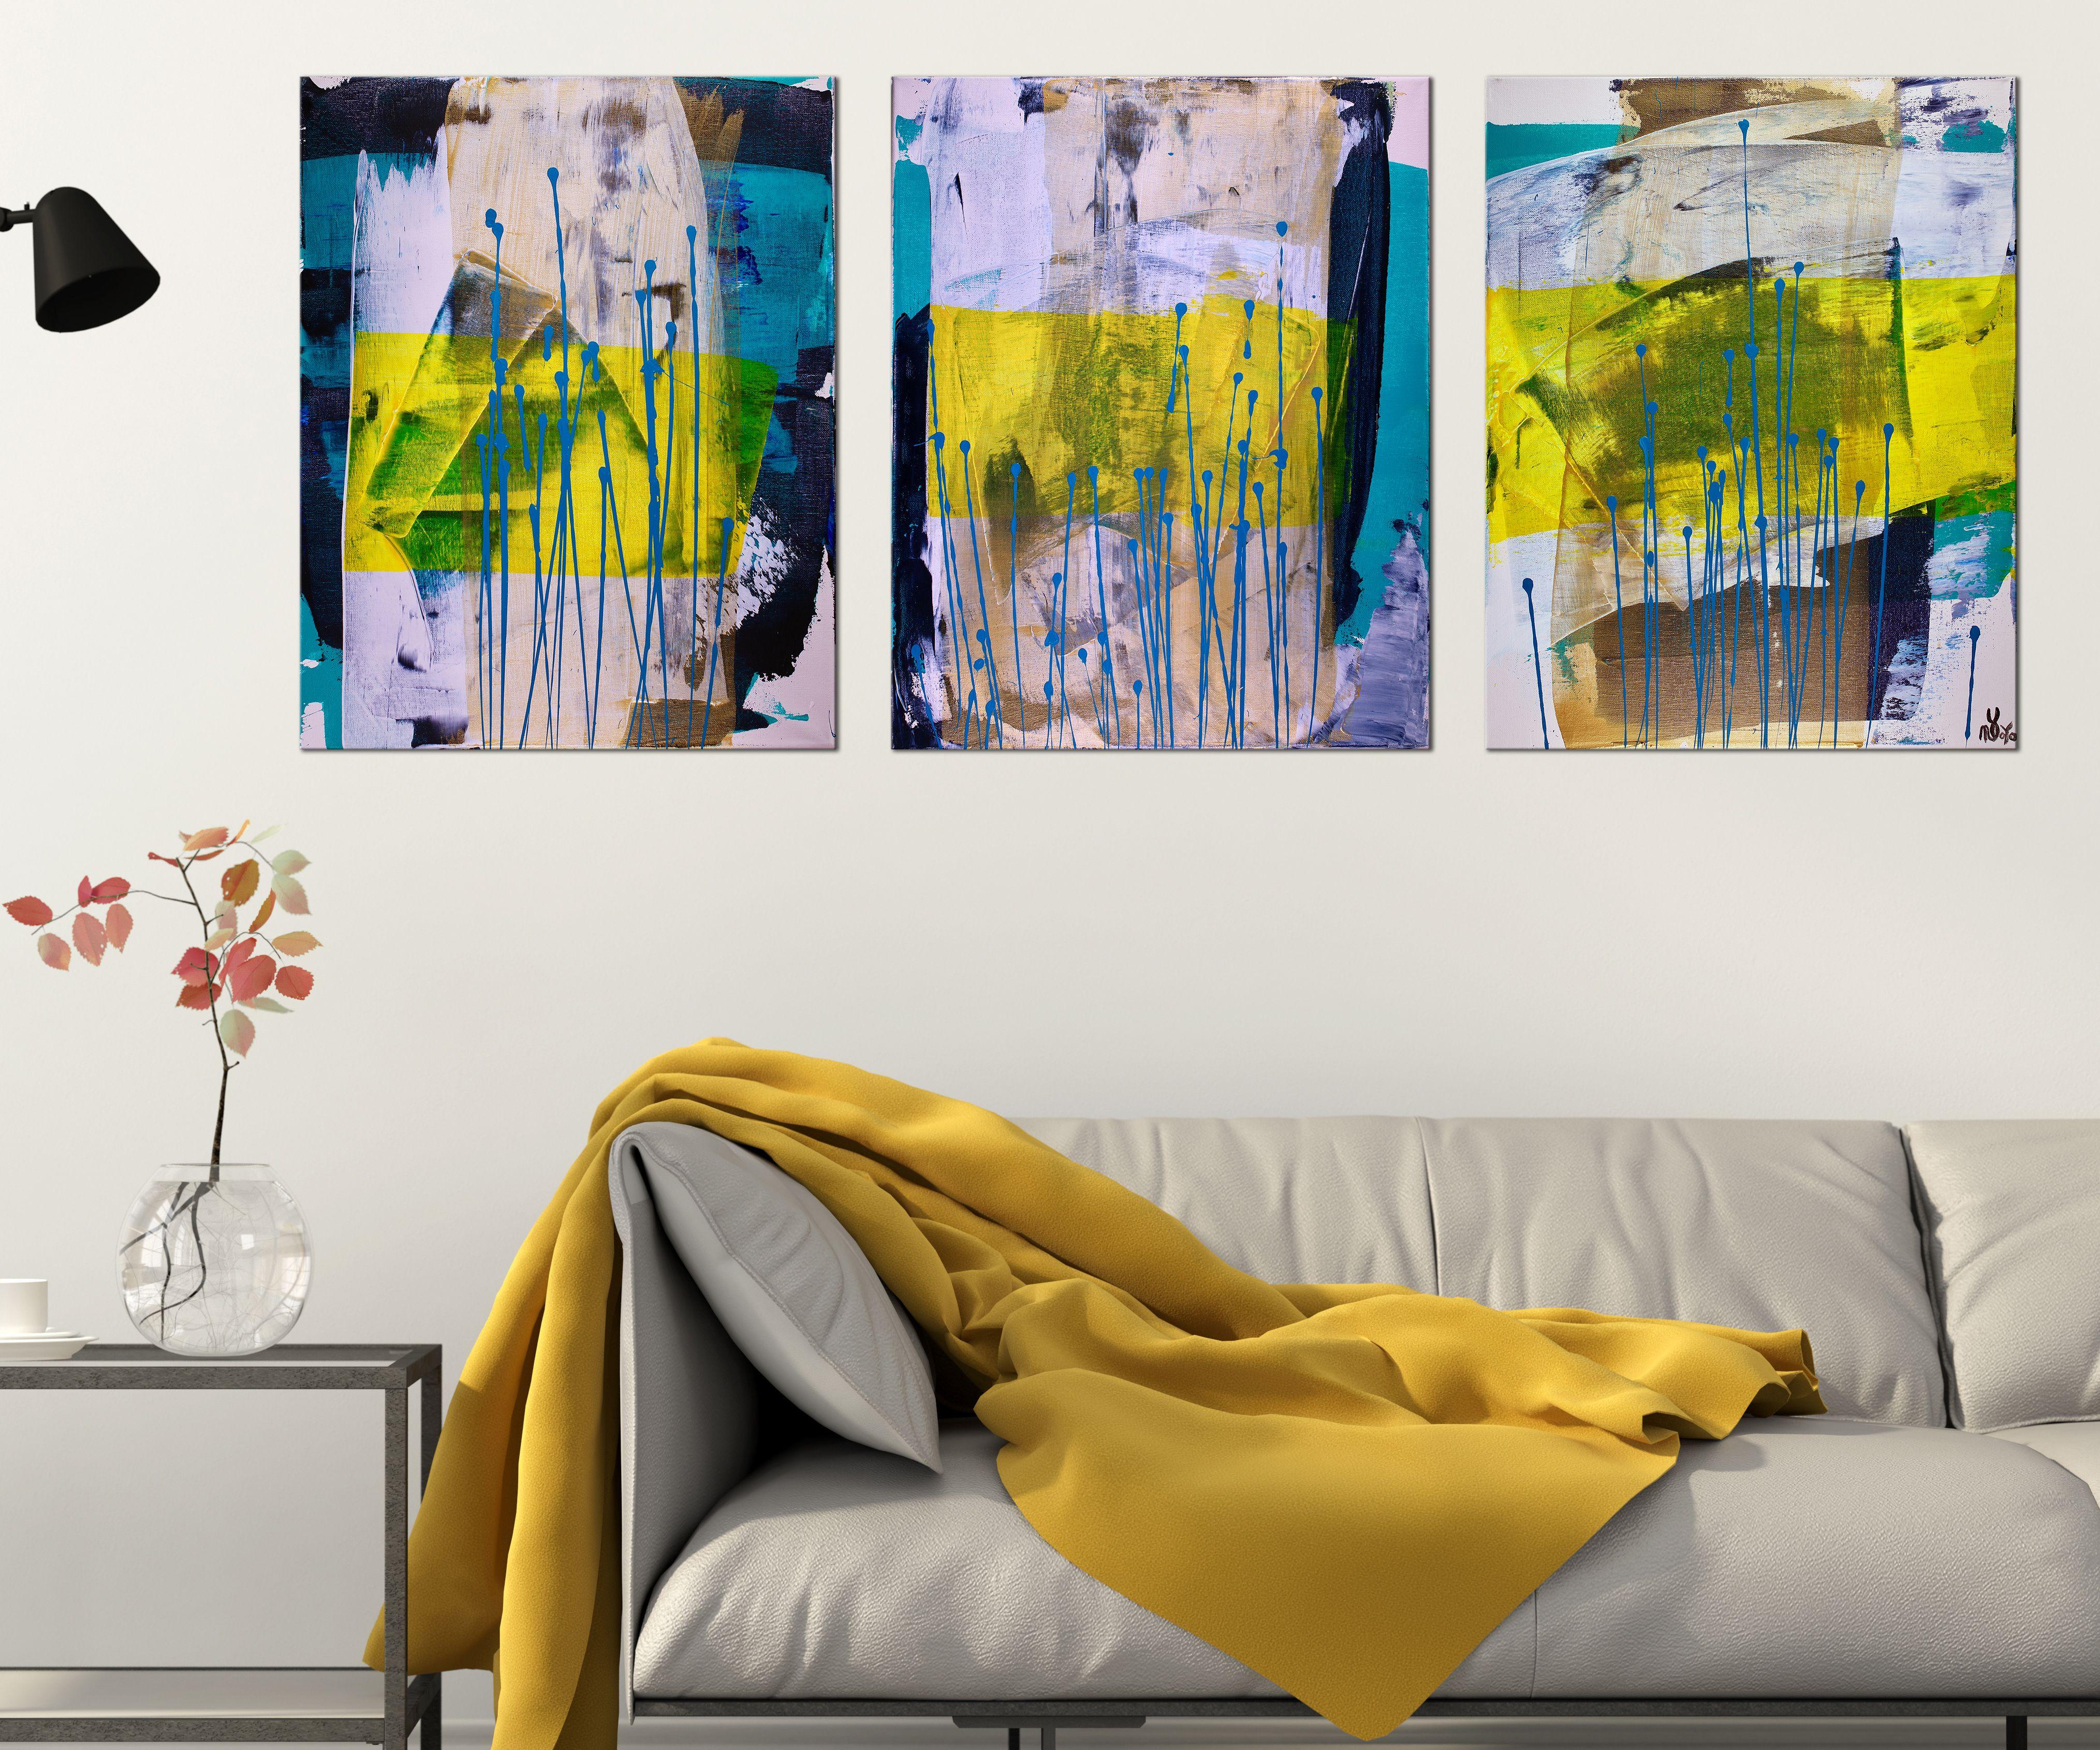 MULTI CANVAS ABSTRACT!!!    Spontaneous feel with organic and geometric imagery and shapes. Teal, yellow, white and gold.    I include a certificate of authenticity that lists the materials as well as when the painting was completed. Fine high